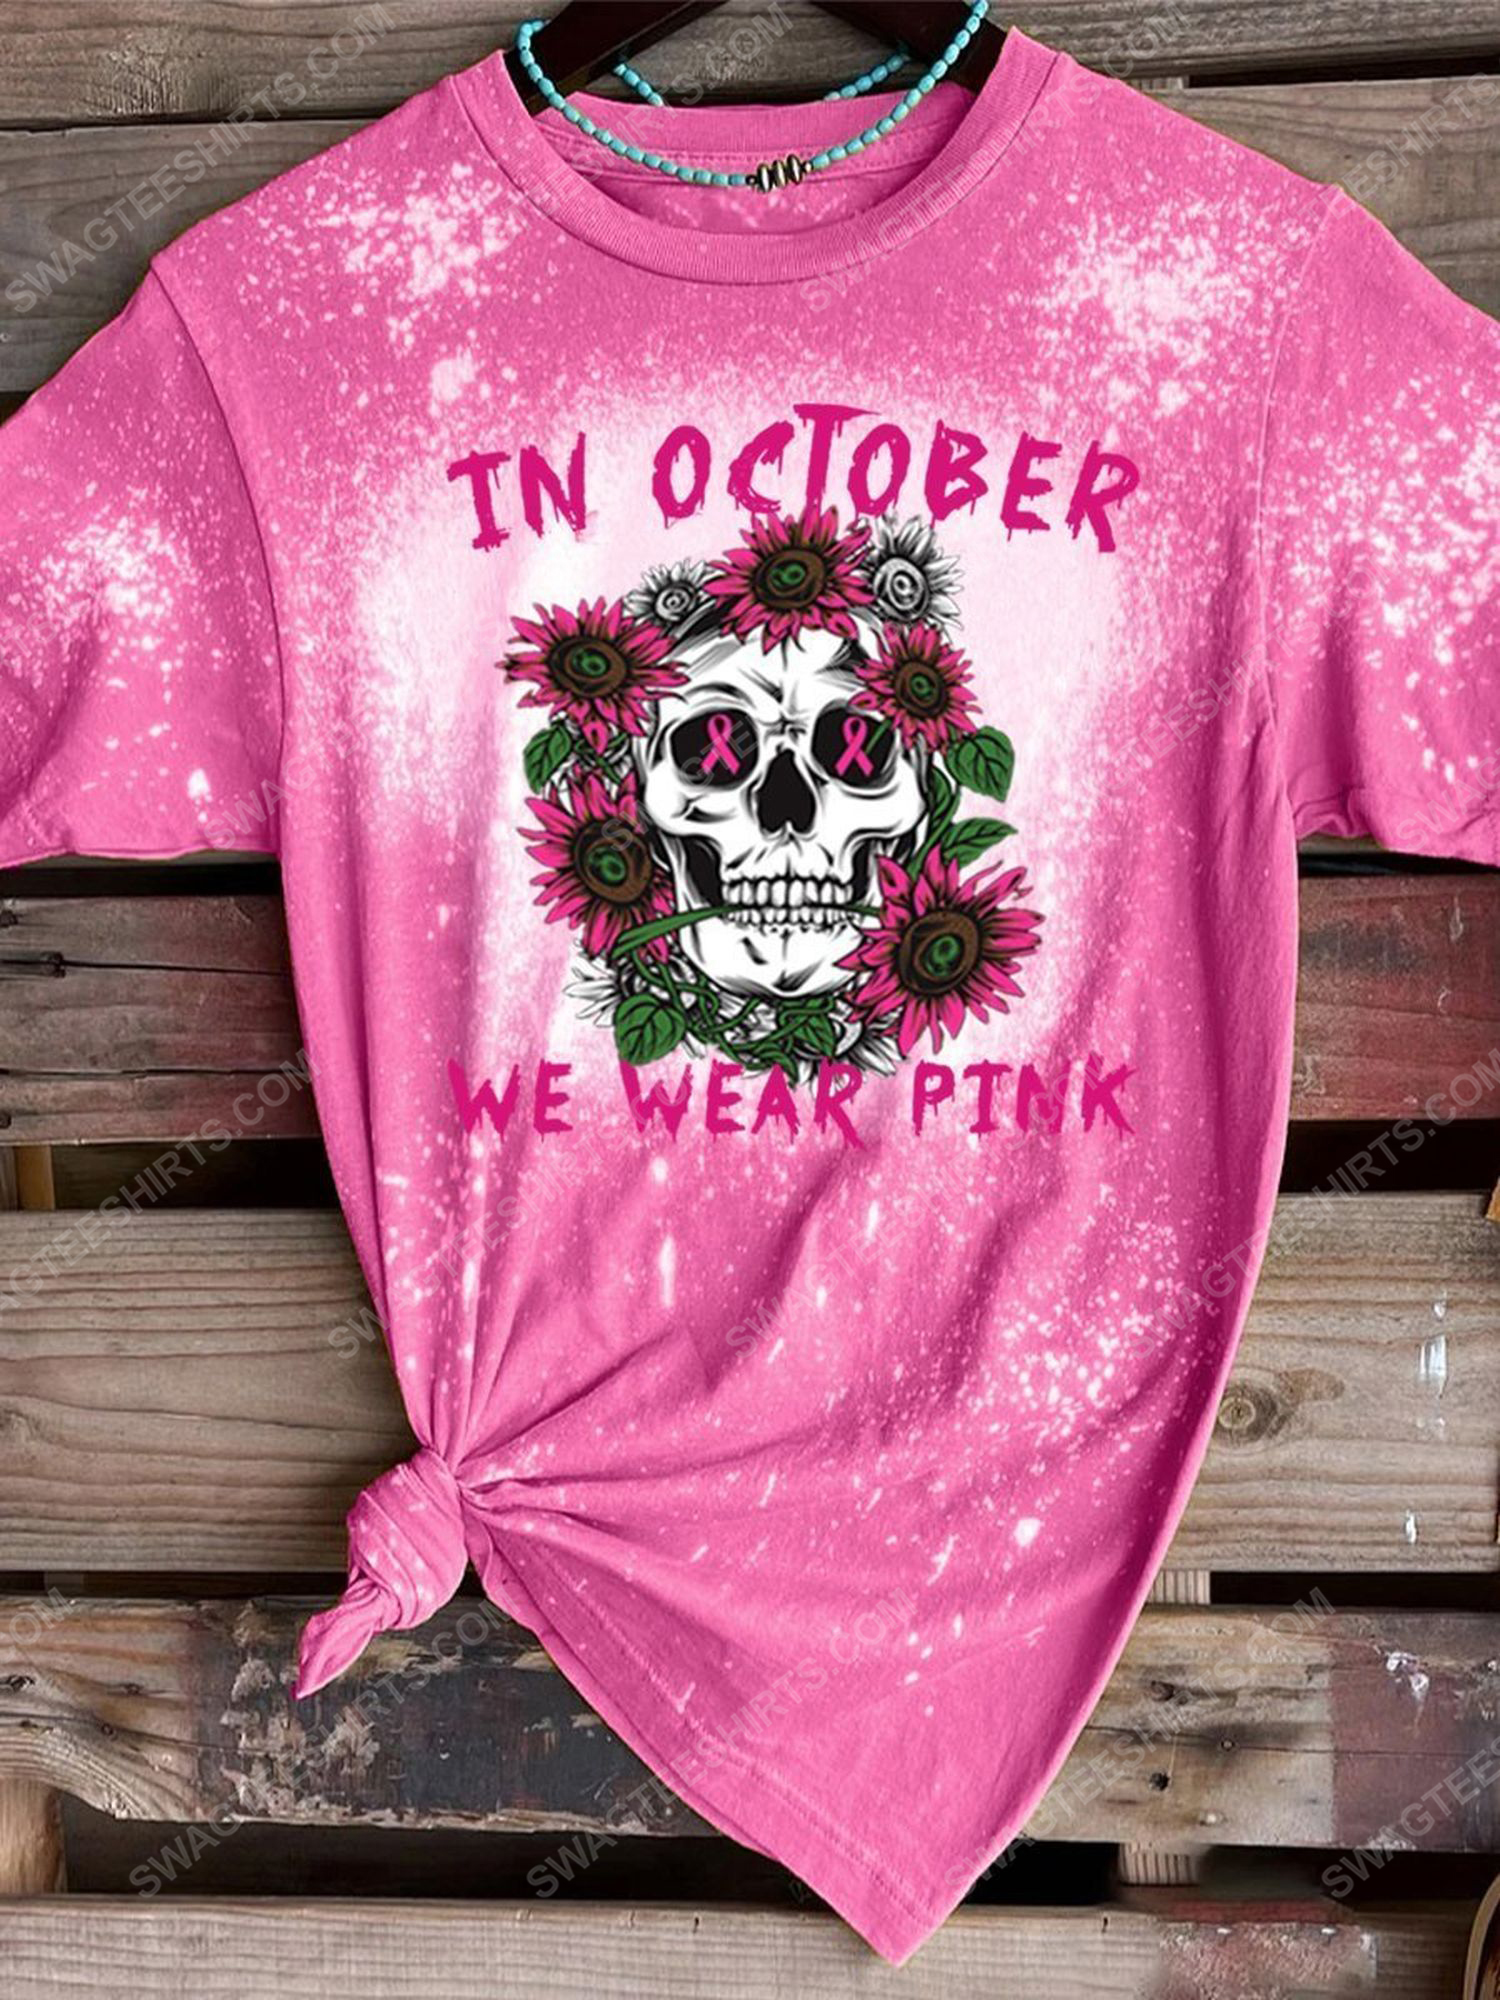 Breast cancer awareness in october we wear pink skull tie dye bleached shirt